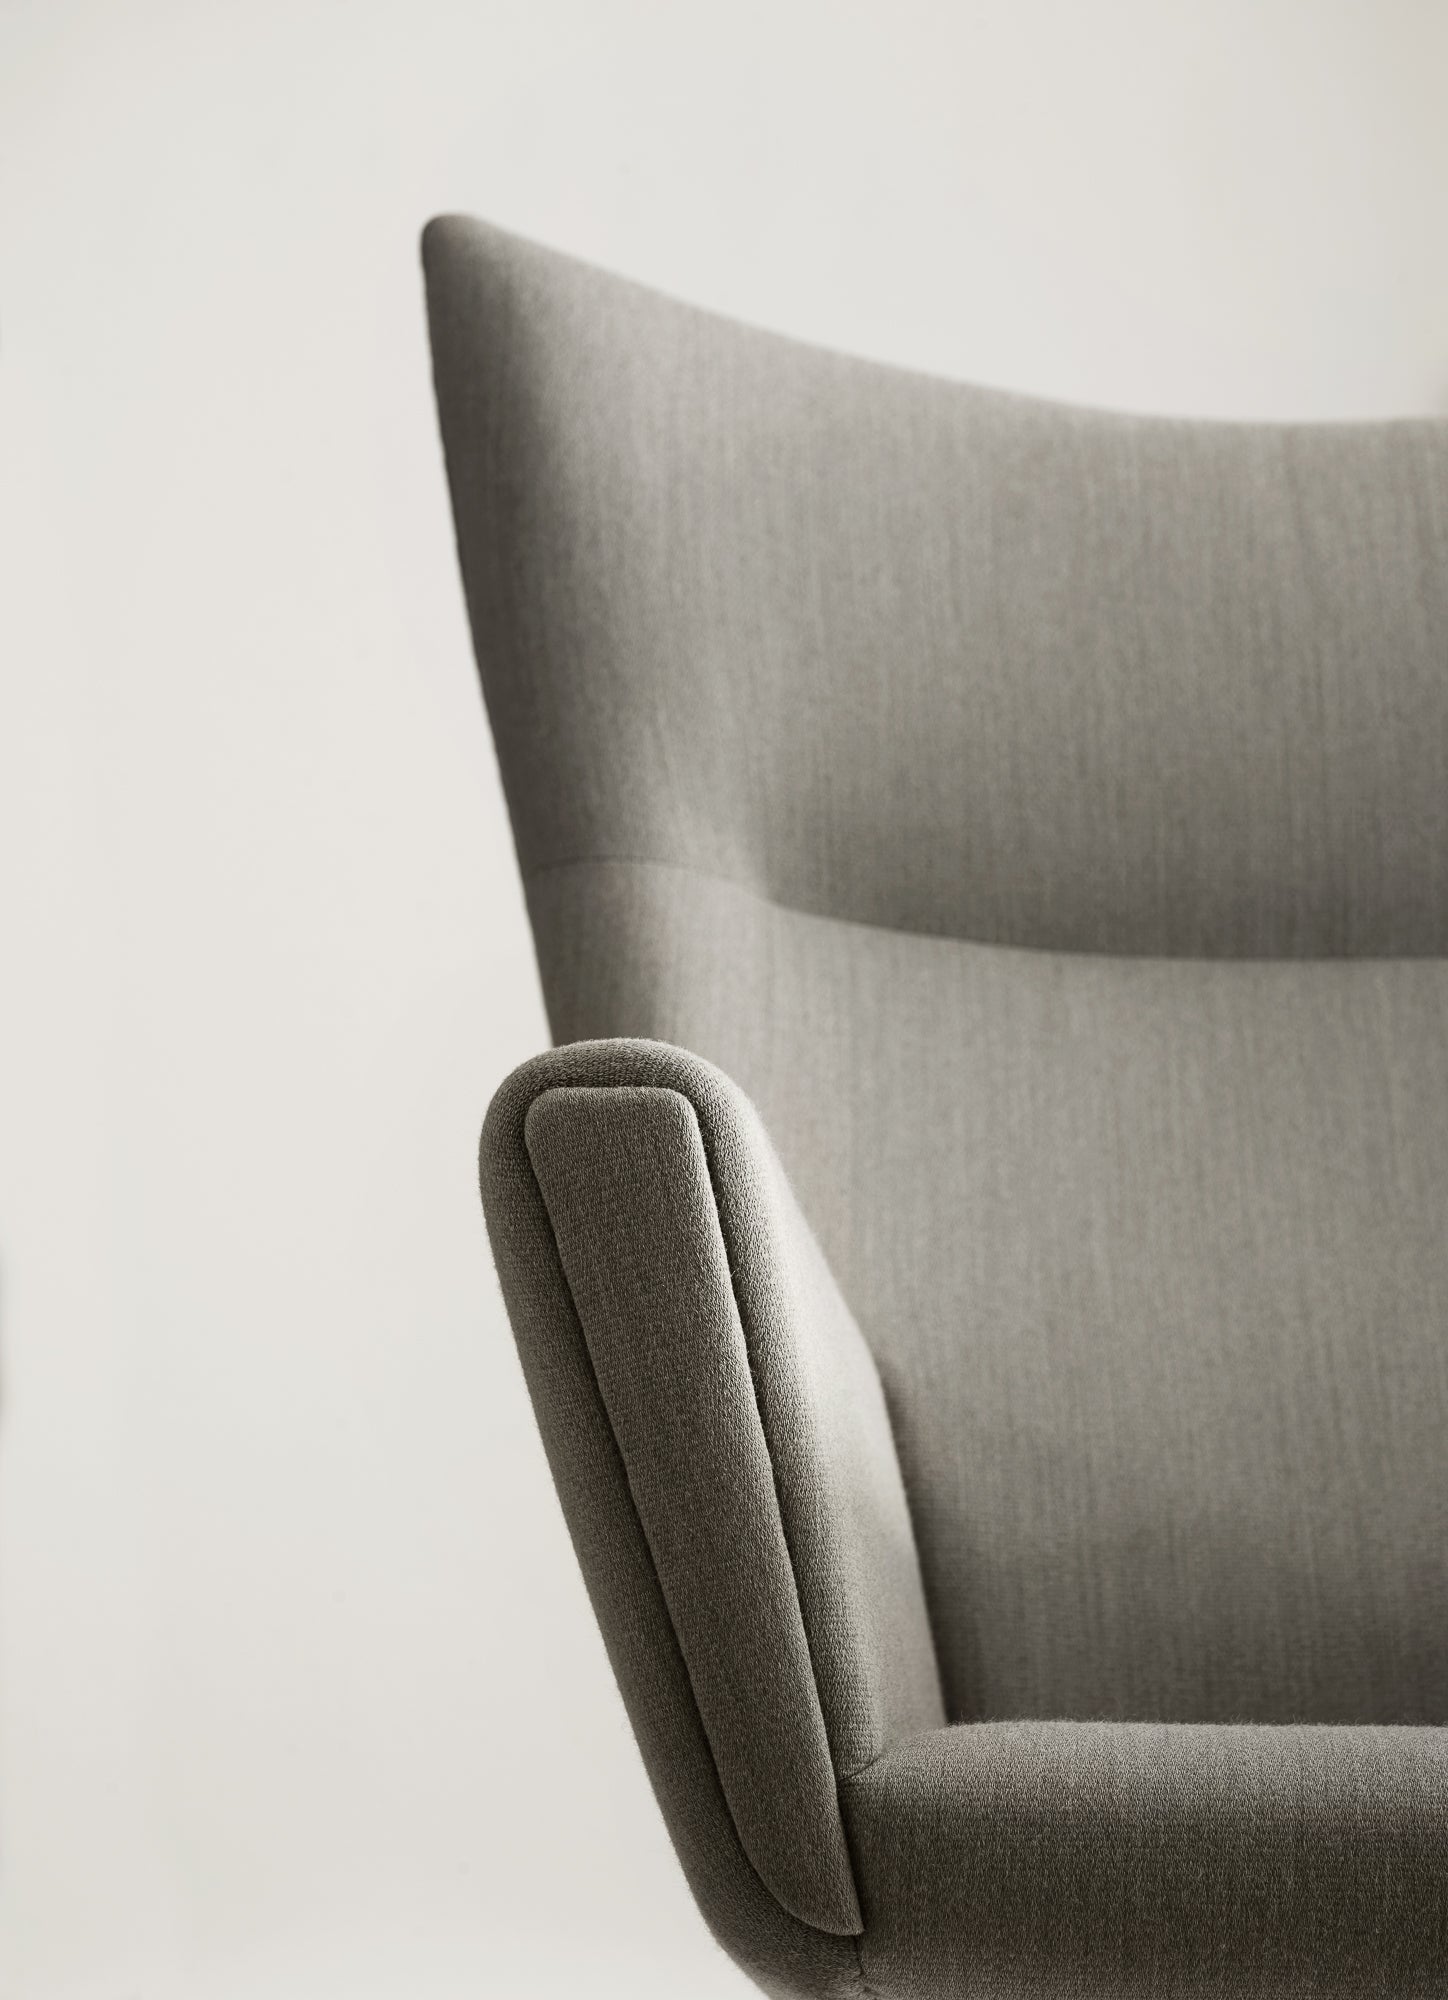 CH445 Wing Chair